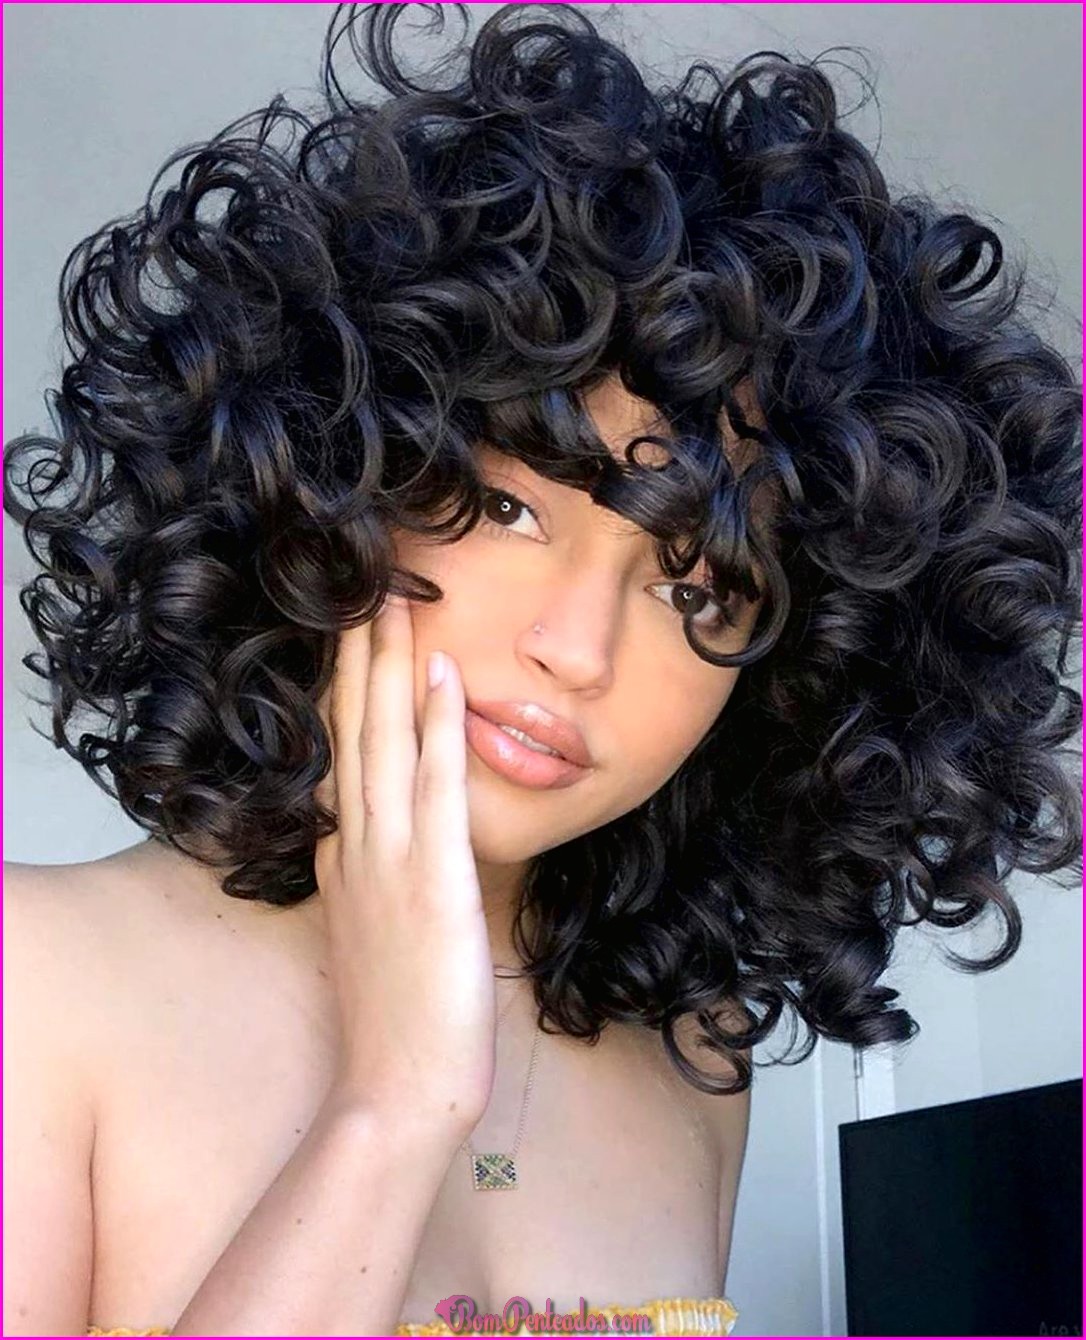 Penteados curly curly mulher